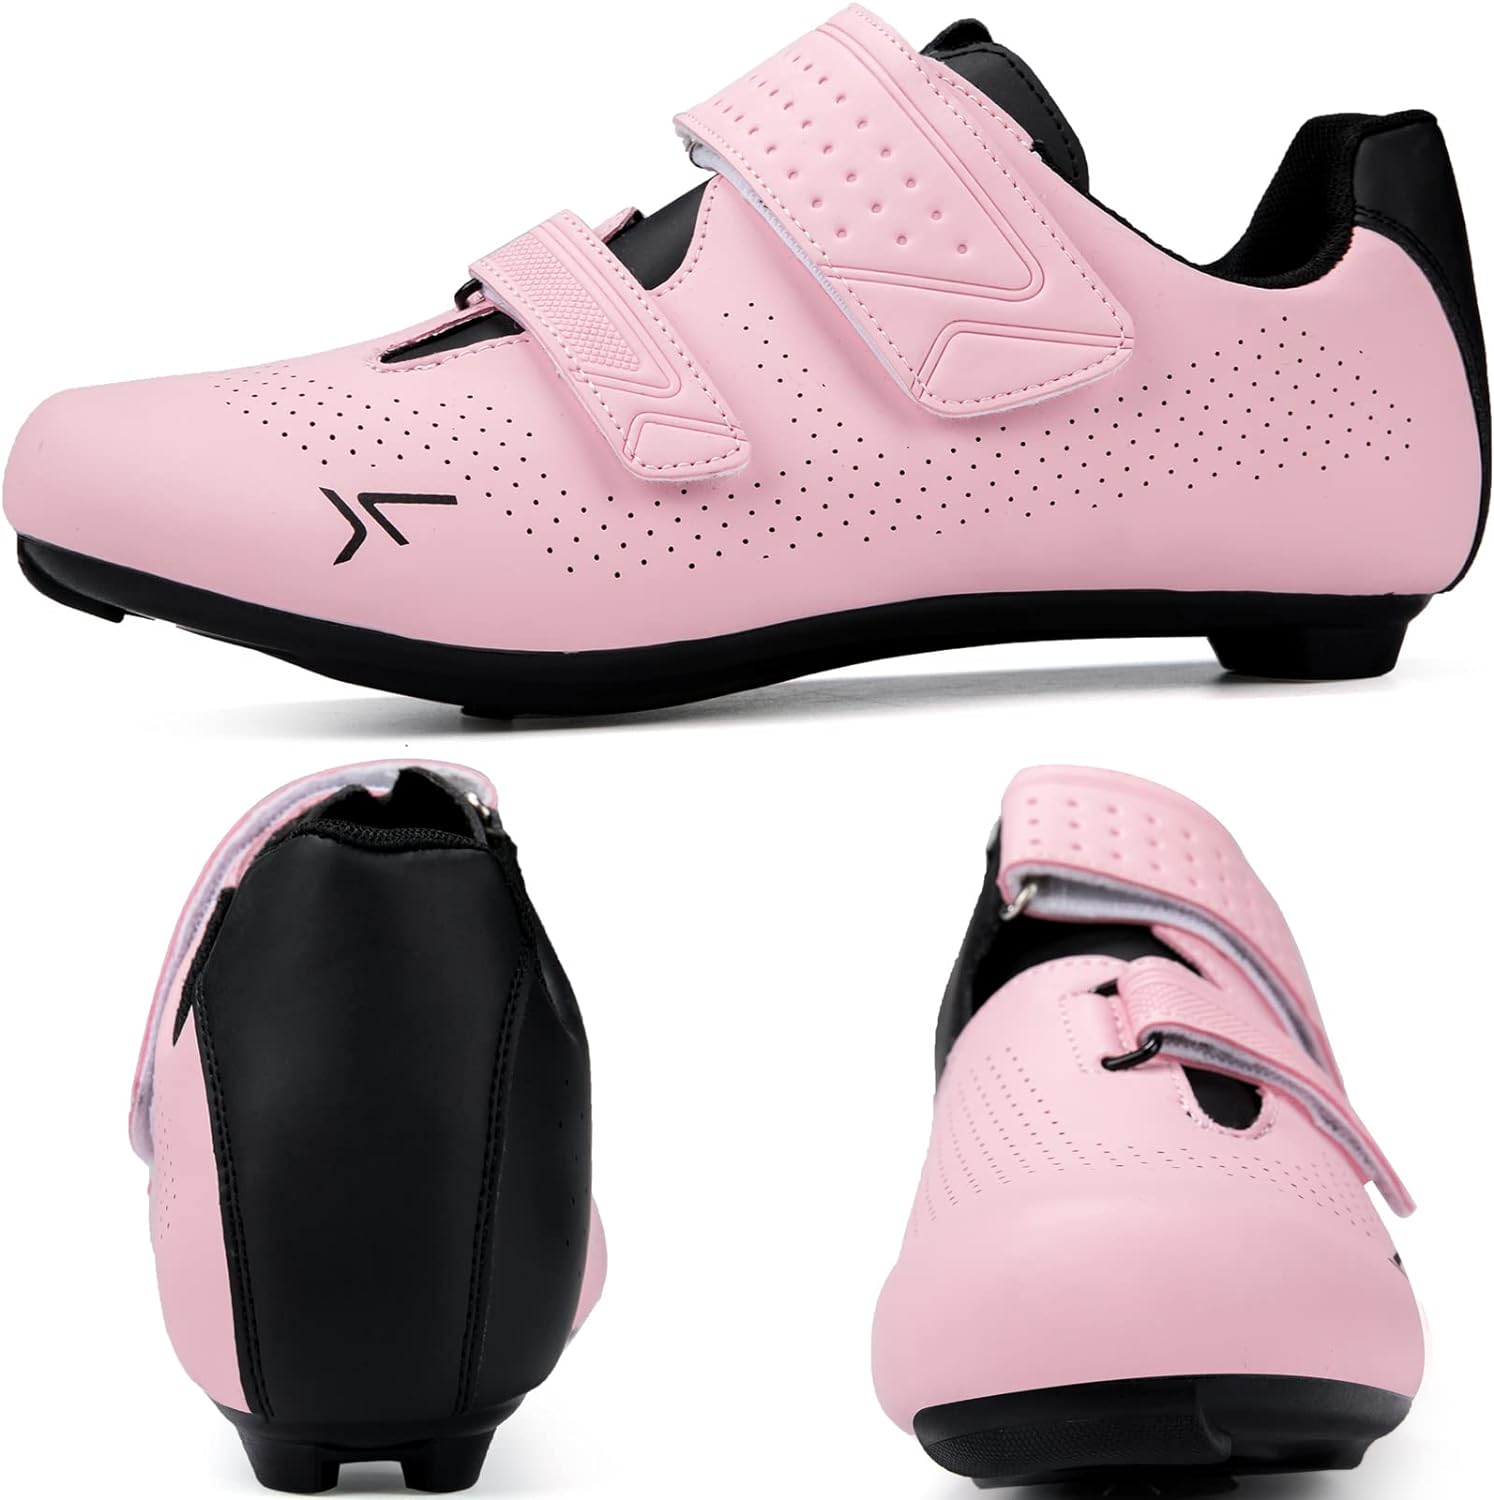 Unisex Cycling Shoes with Delta Cleats for Peloton and Road Bikes ...